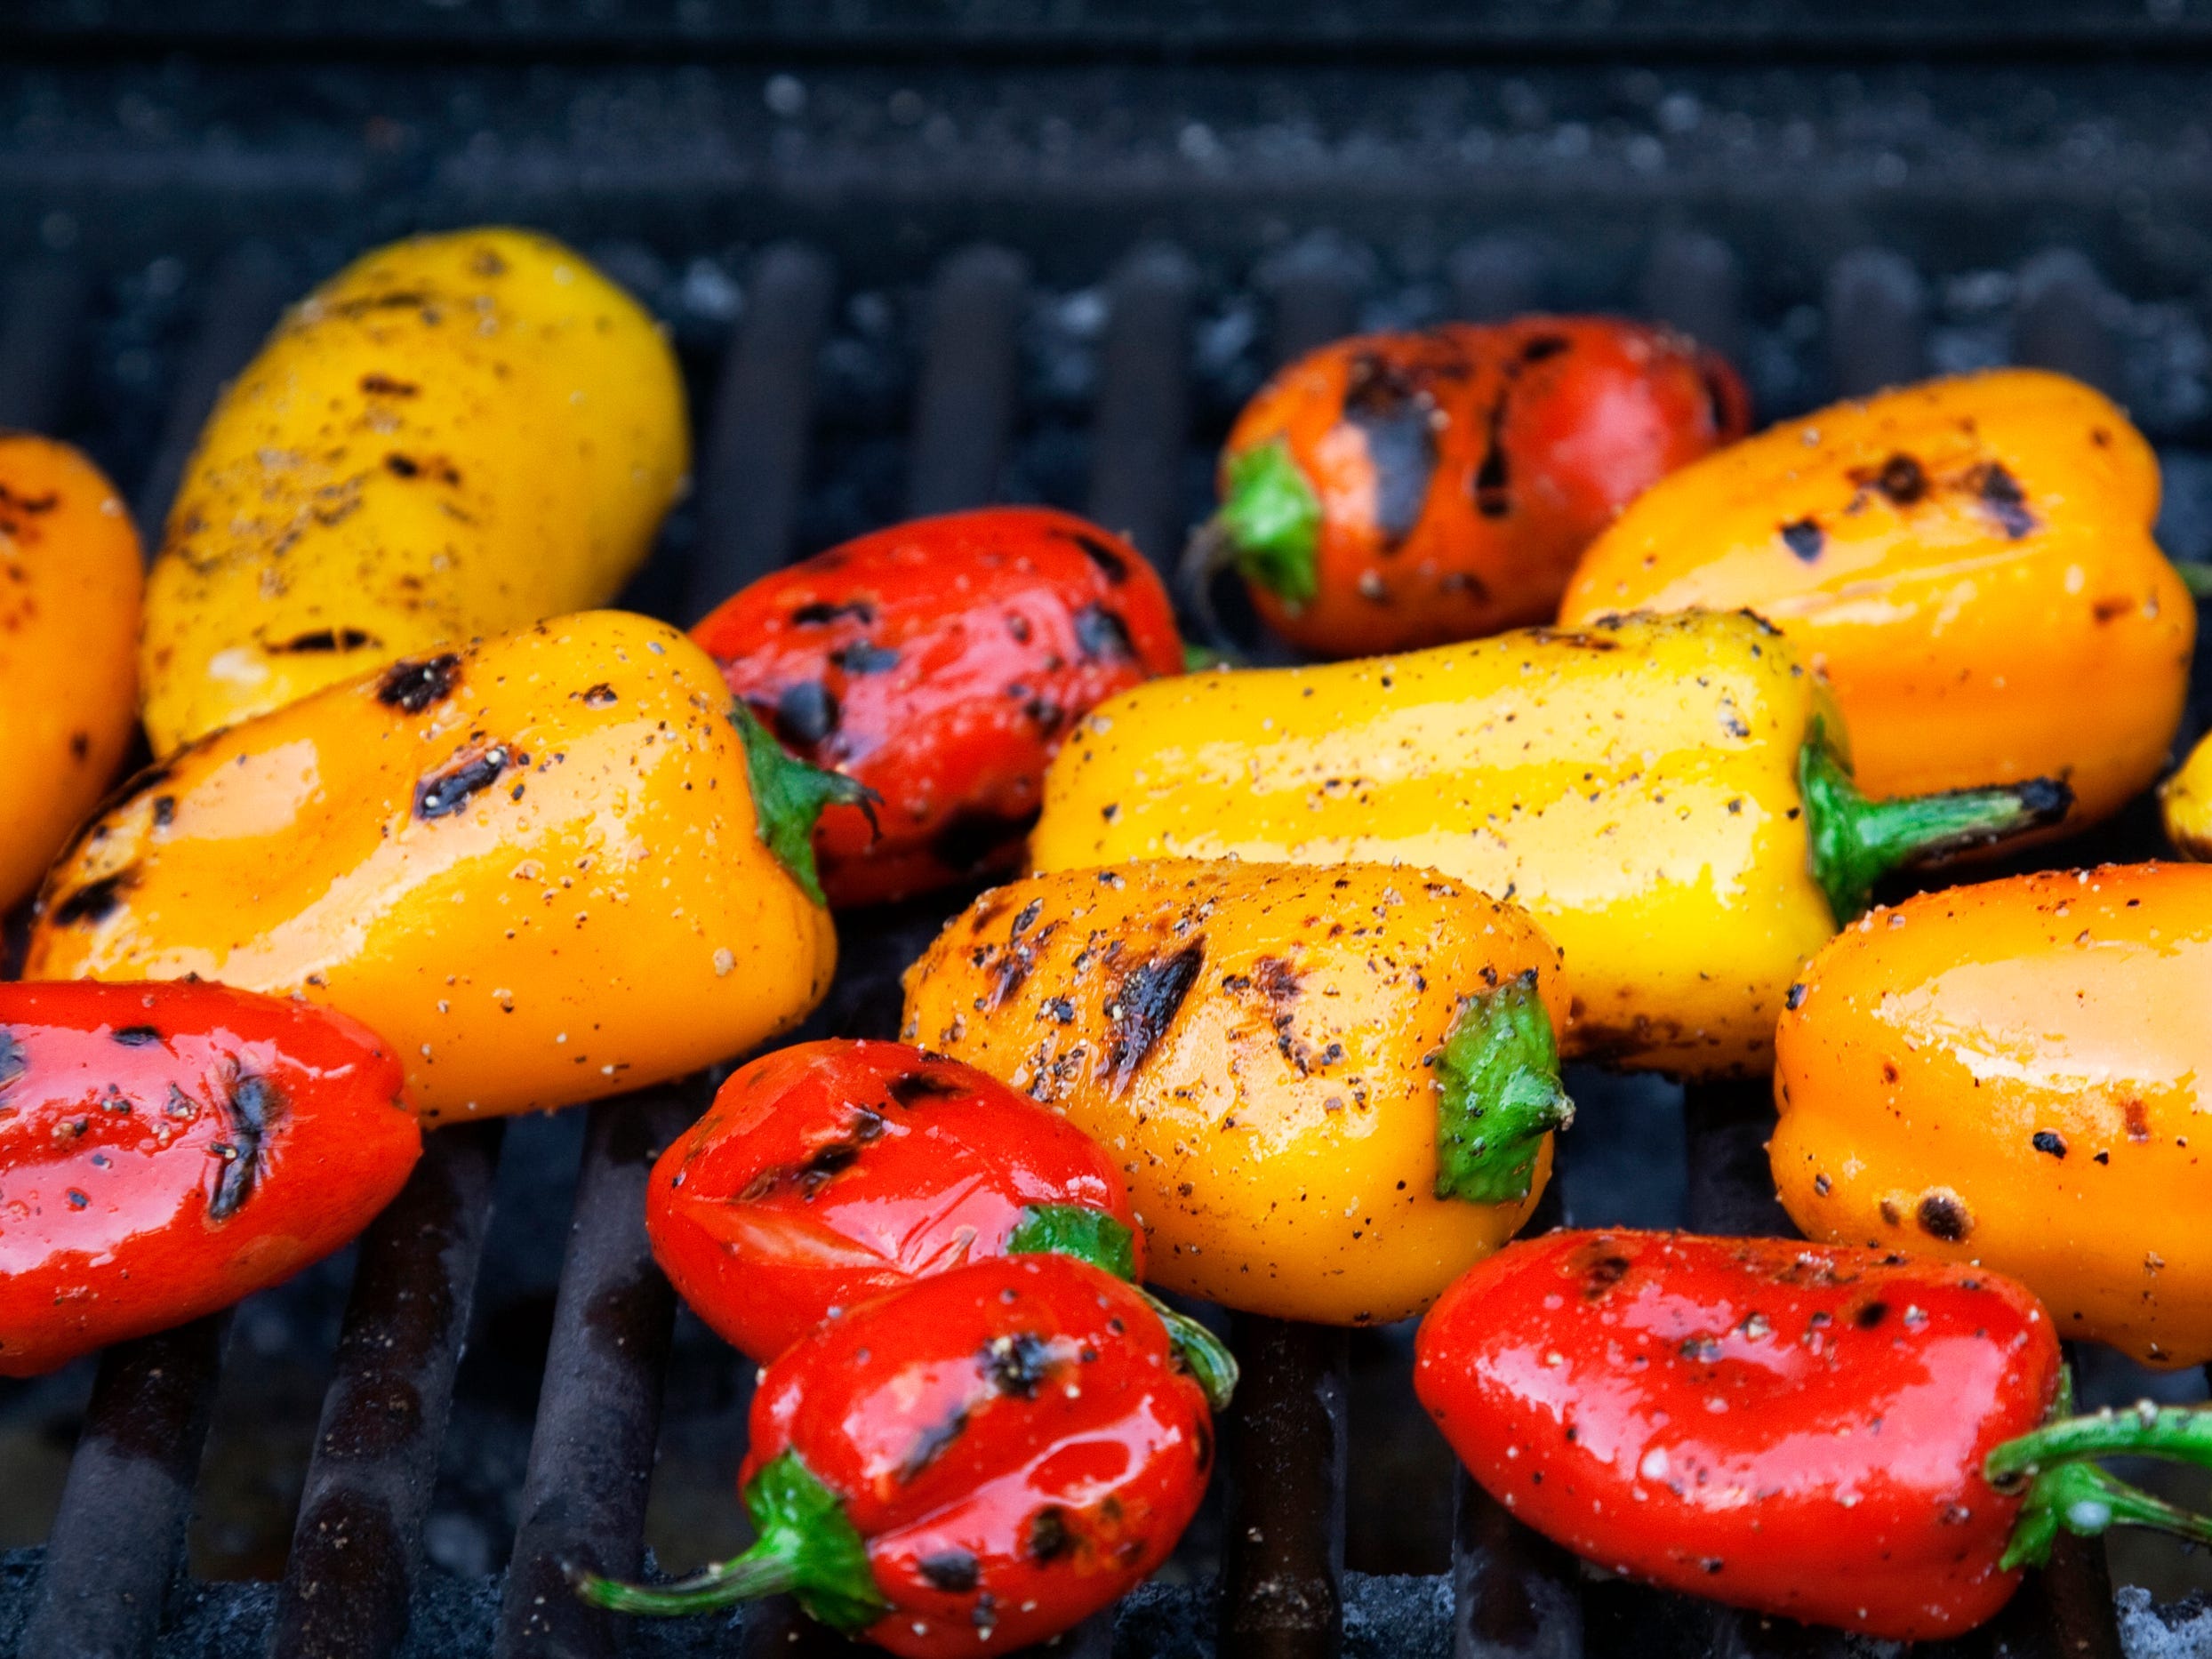 Small red and yellow peppers on a grill